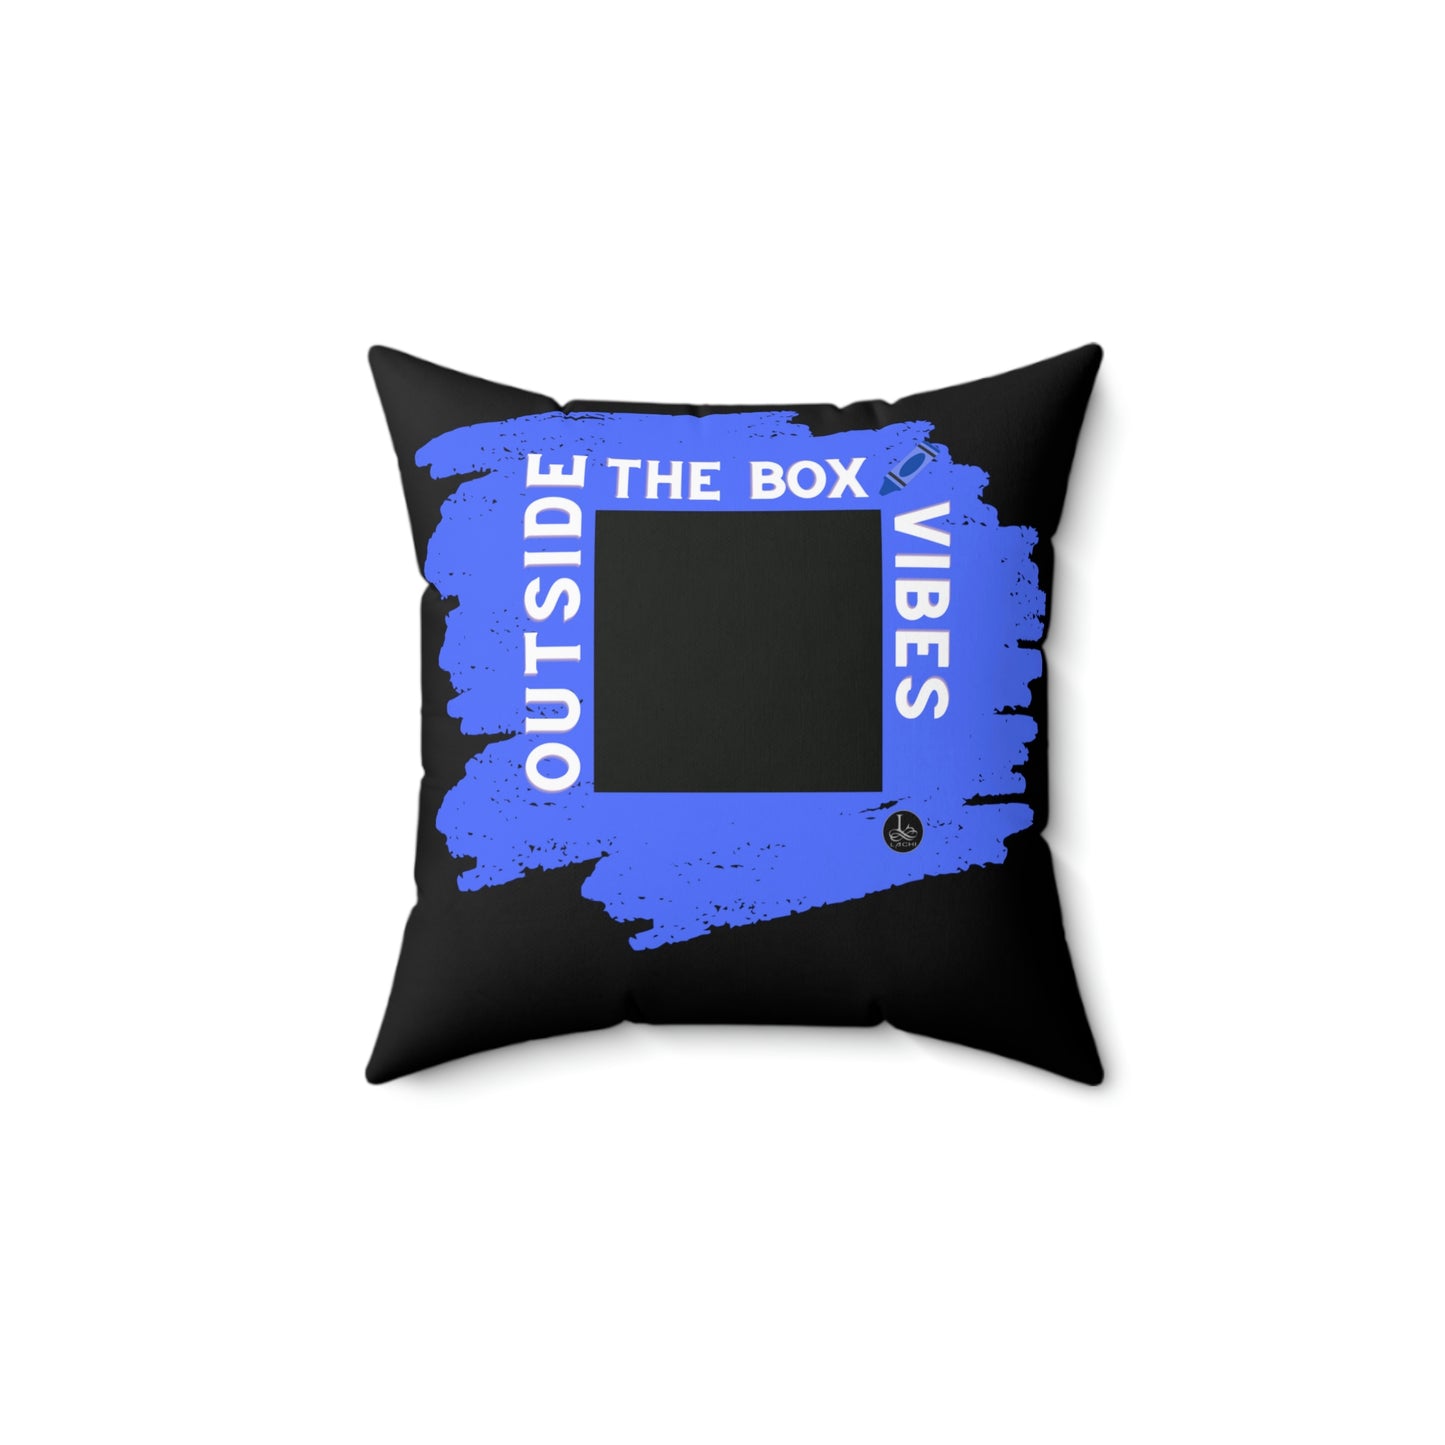 Outside the box Vibes - Spun Polyester Square Pillow